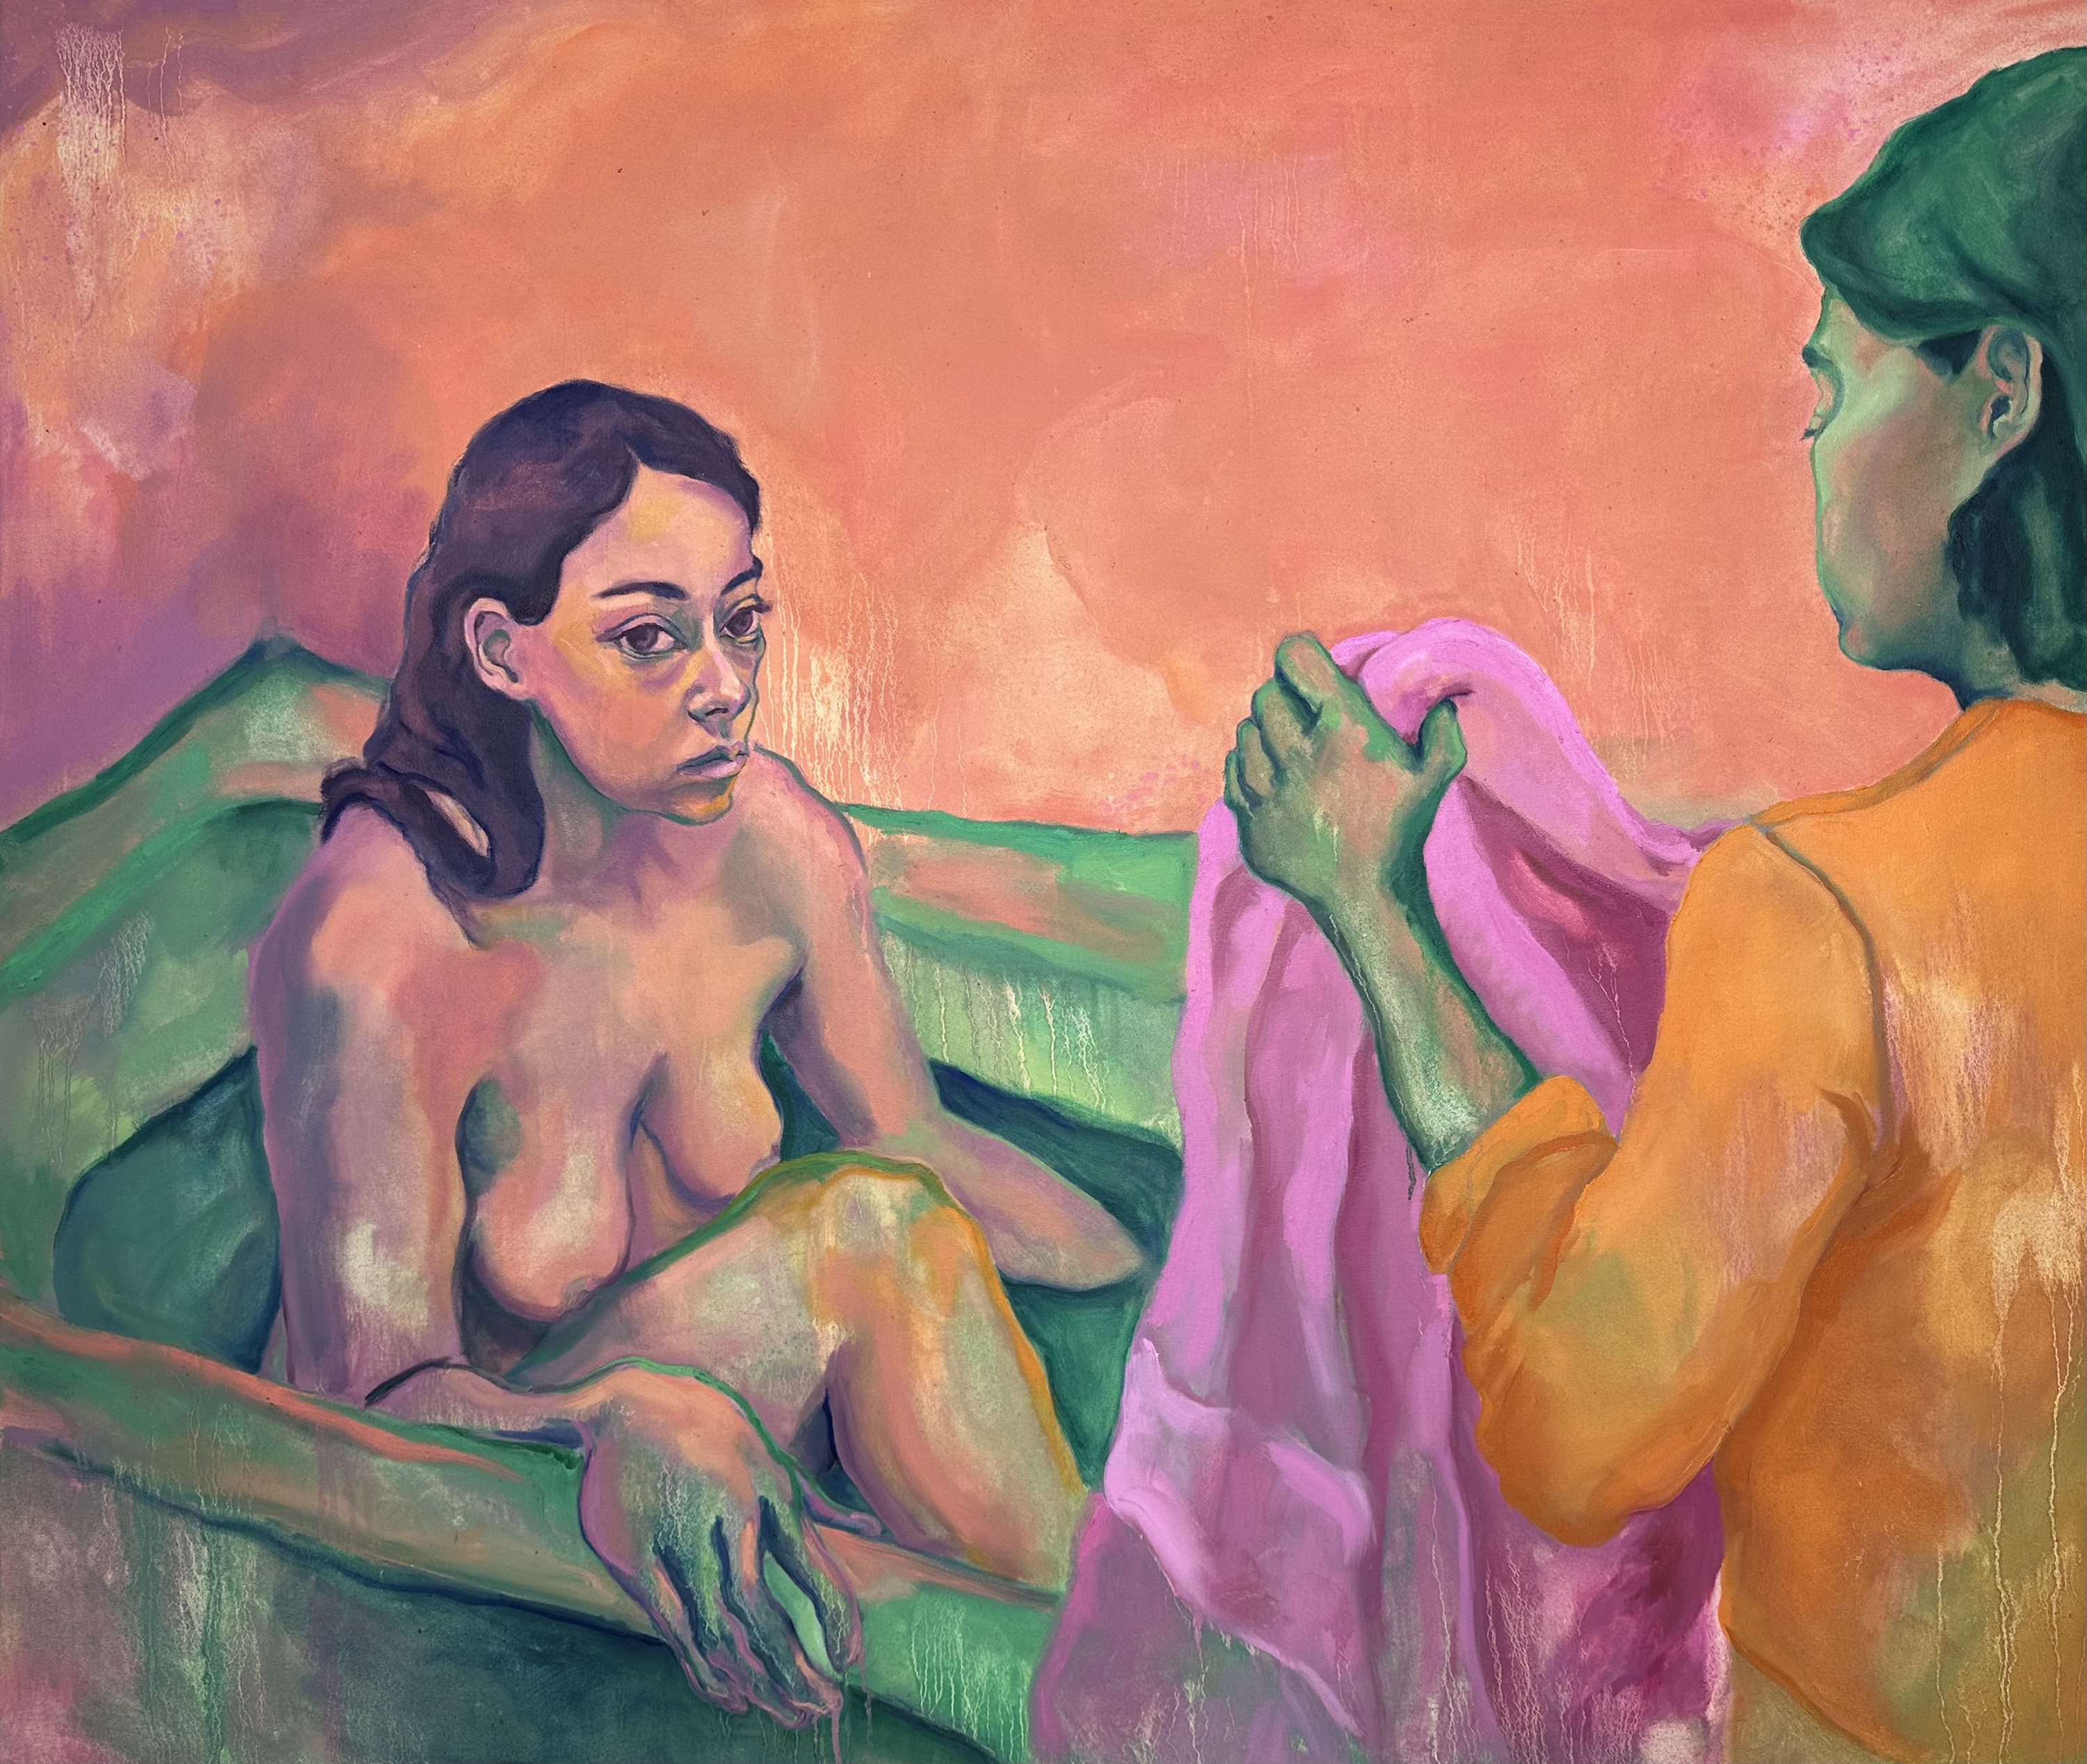 'pink towels and time machines', Tabitha Rose Owen, Oil on Canvas, 115 x 135 cm